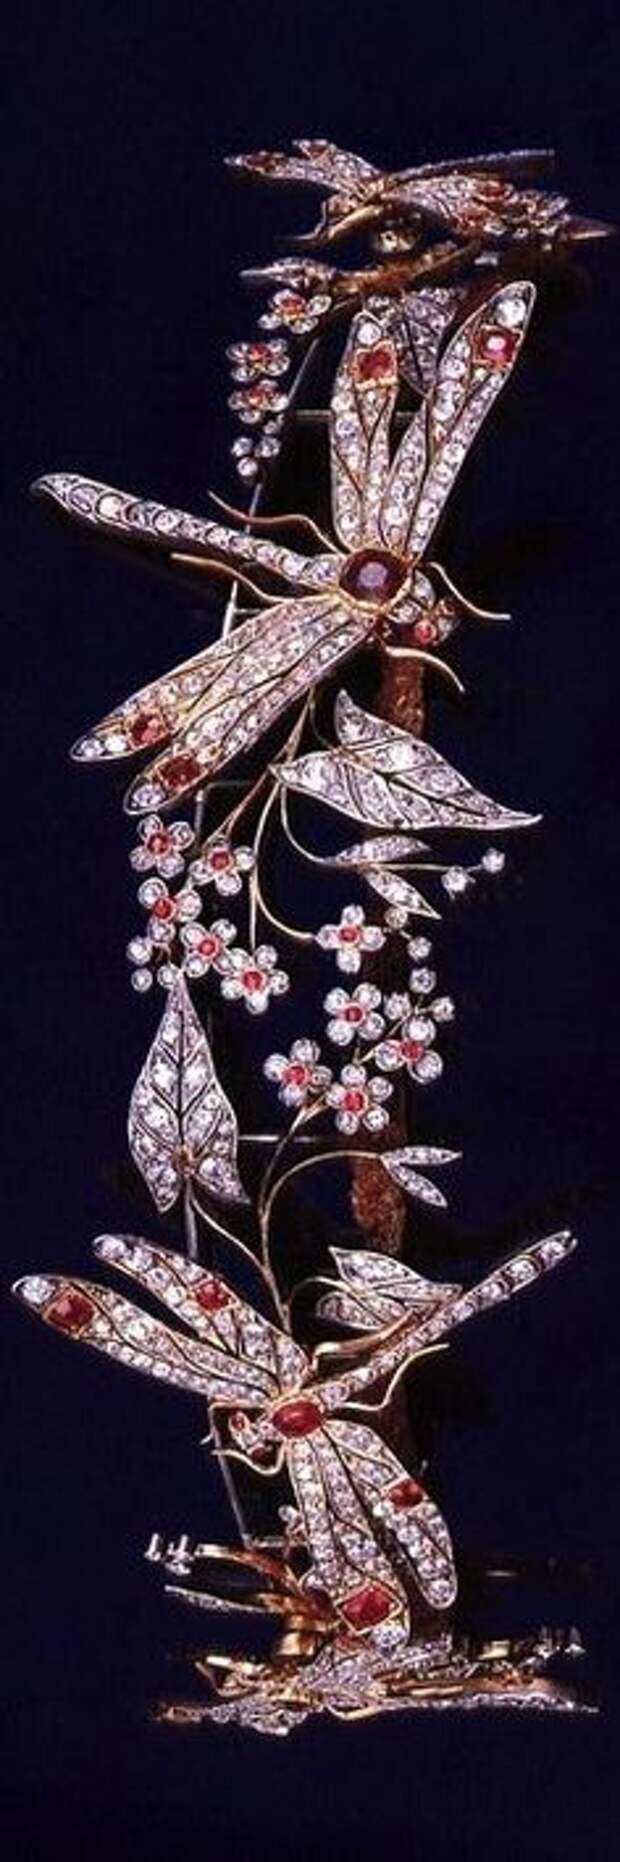 Castro Dragonfly Tiara, Italy, circa 1900; made by Chaumet; rubies, diamonds, gold.